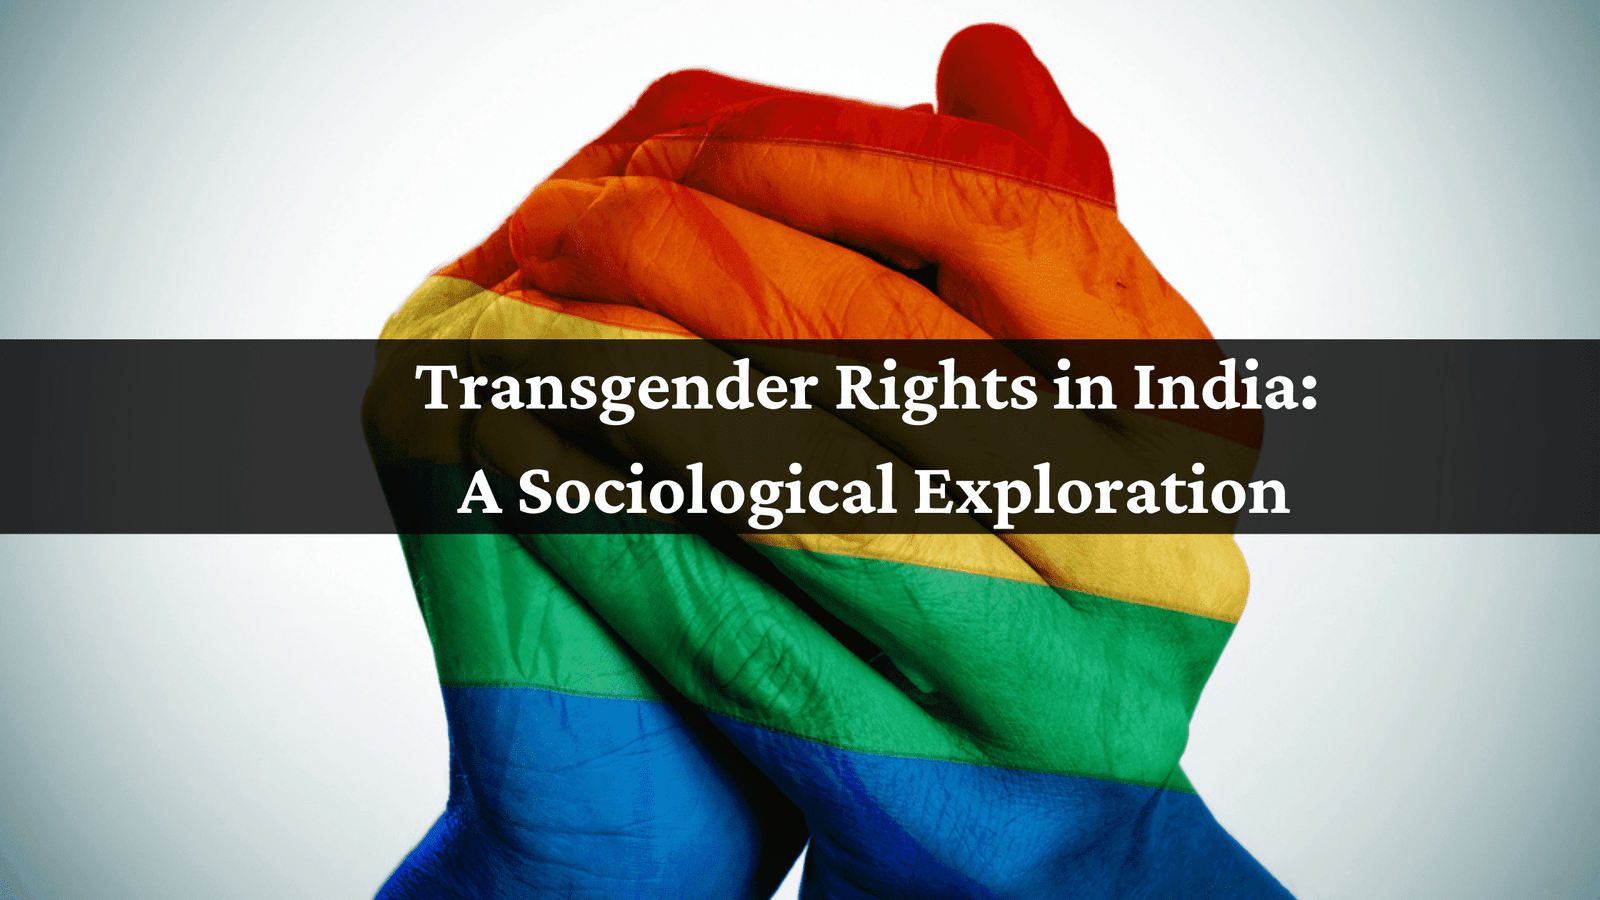 Transgender Rights in India: A Sociological Exploration